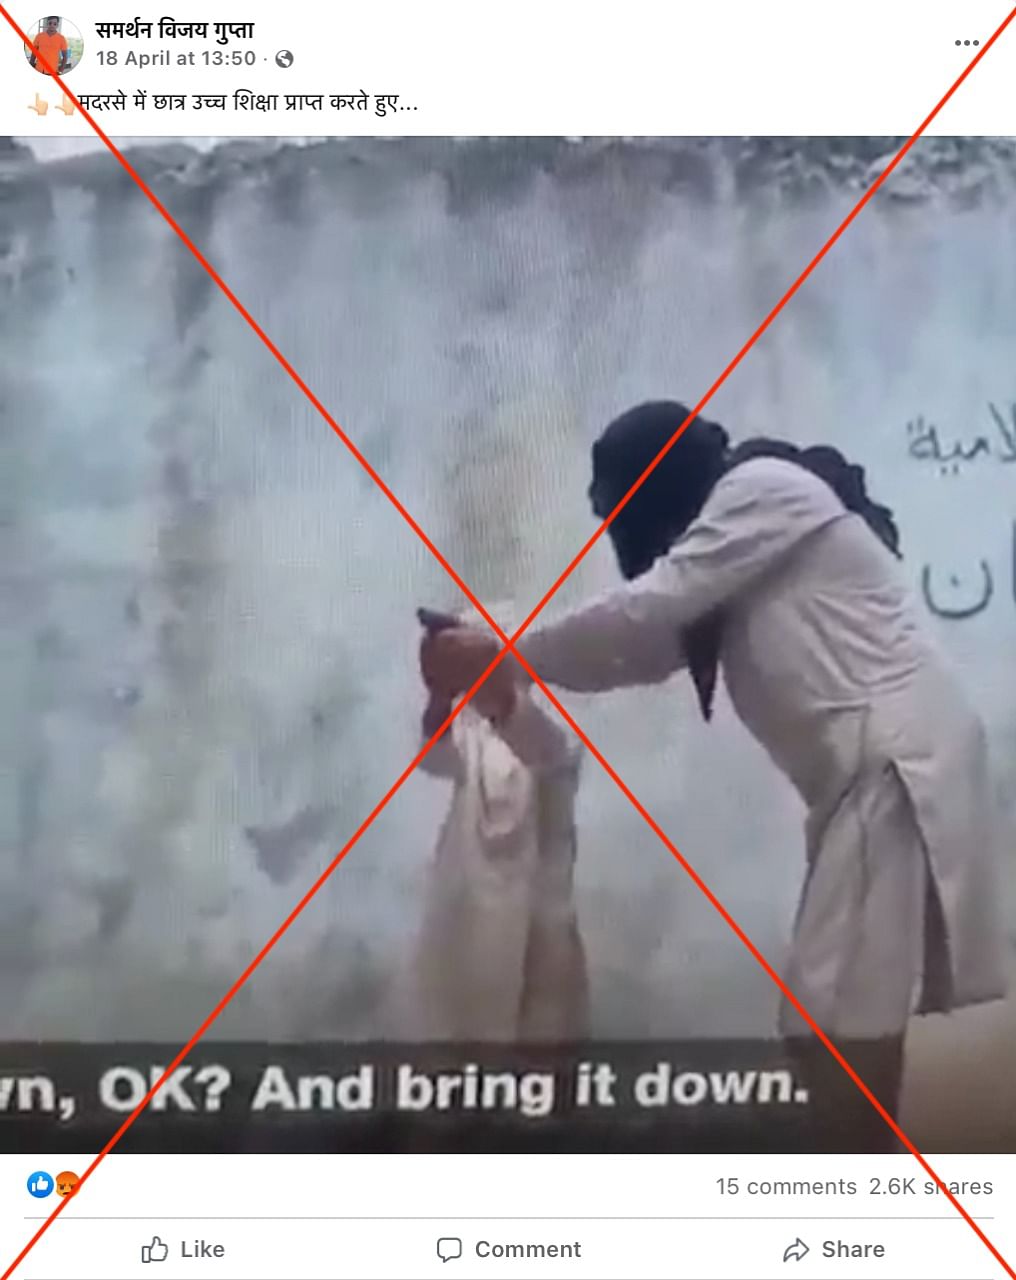 The video is from Al Jazeera's documentary on ISIL and the Taliban shot in 2015. 